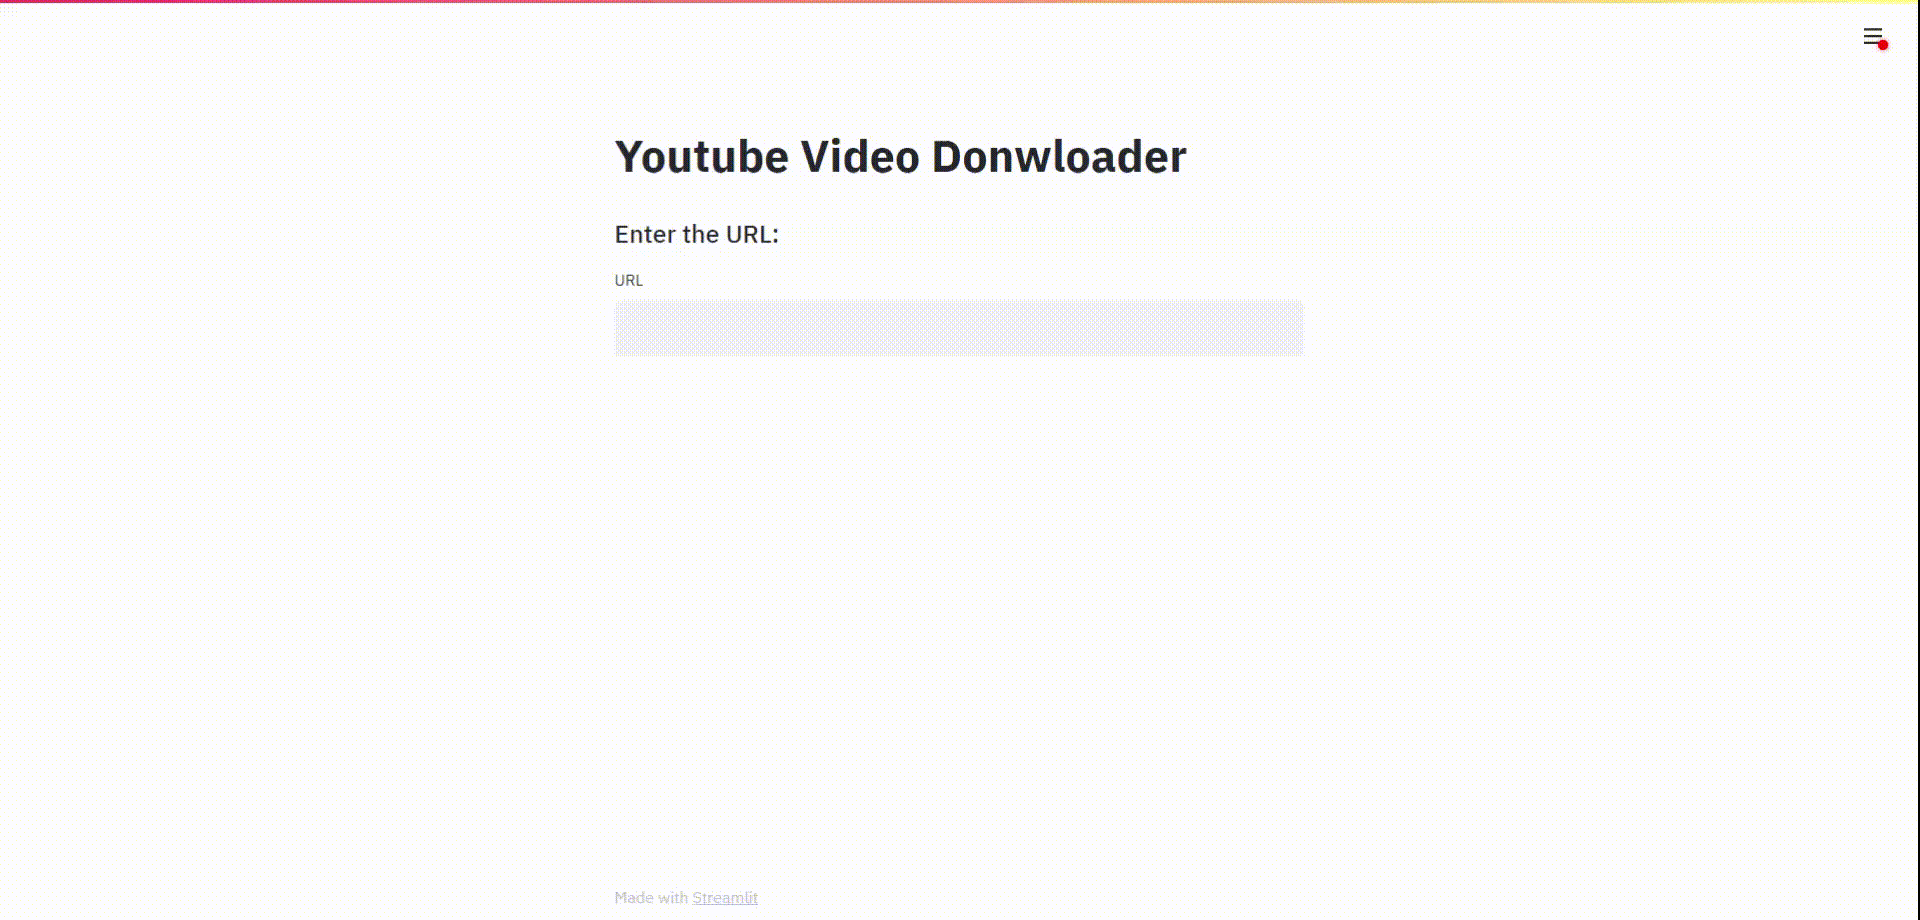 How To Build a Web App To Download YouTube Videos in 30 Lines of Code — Python Project Tutorials